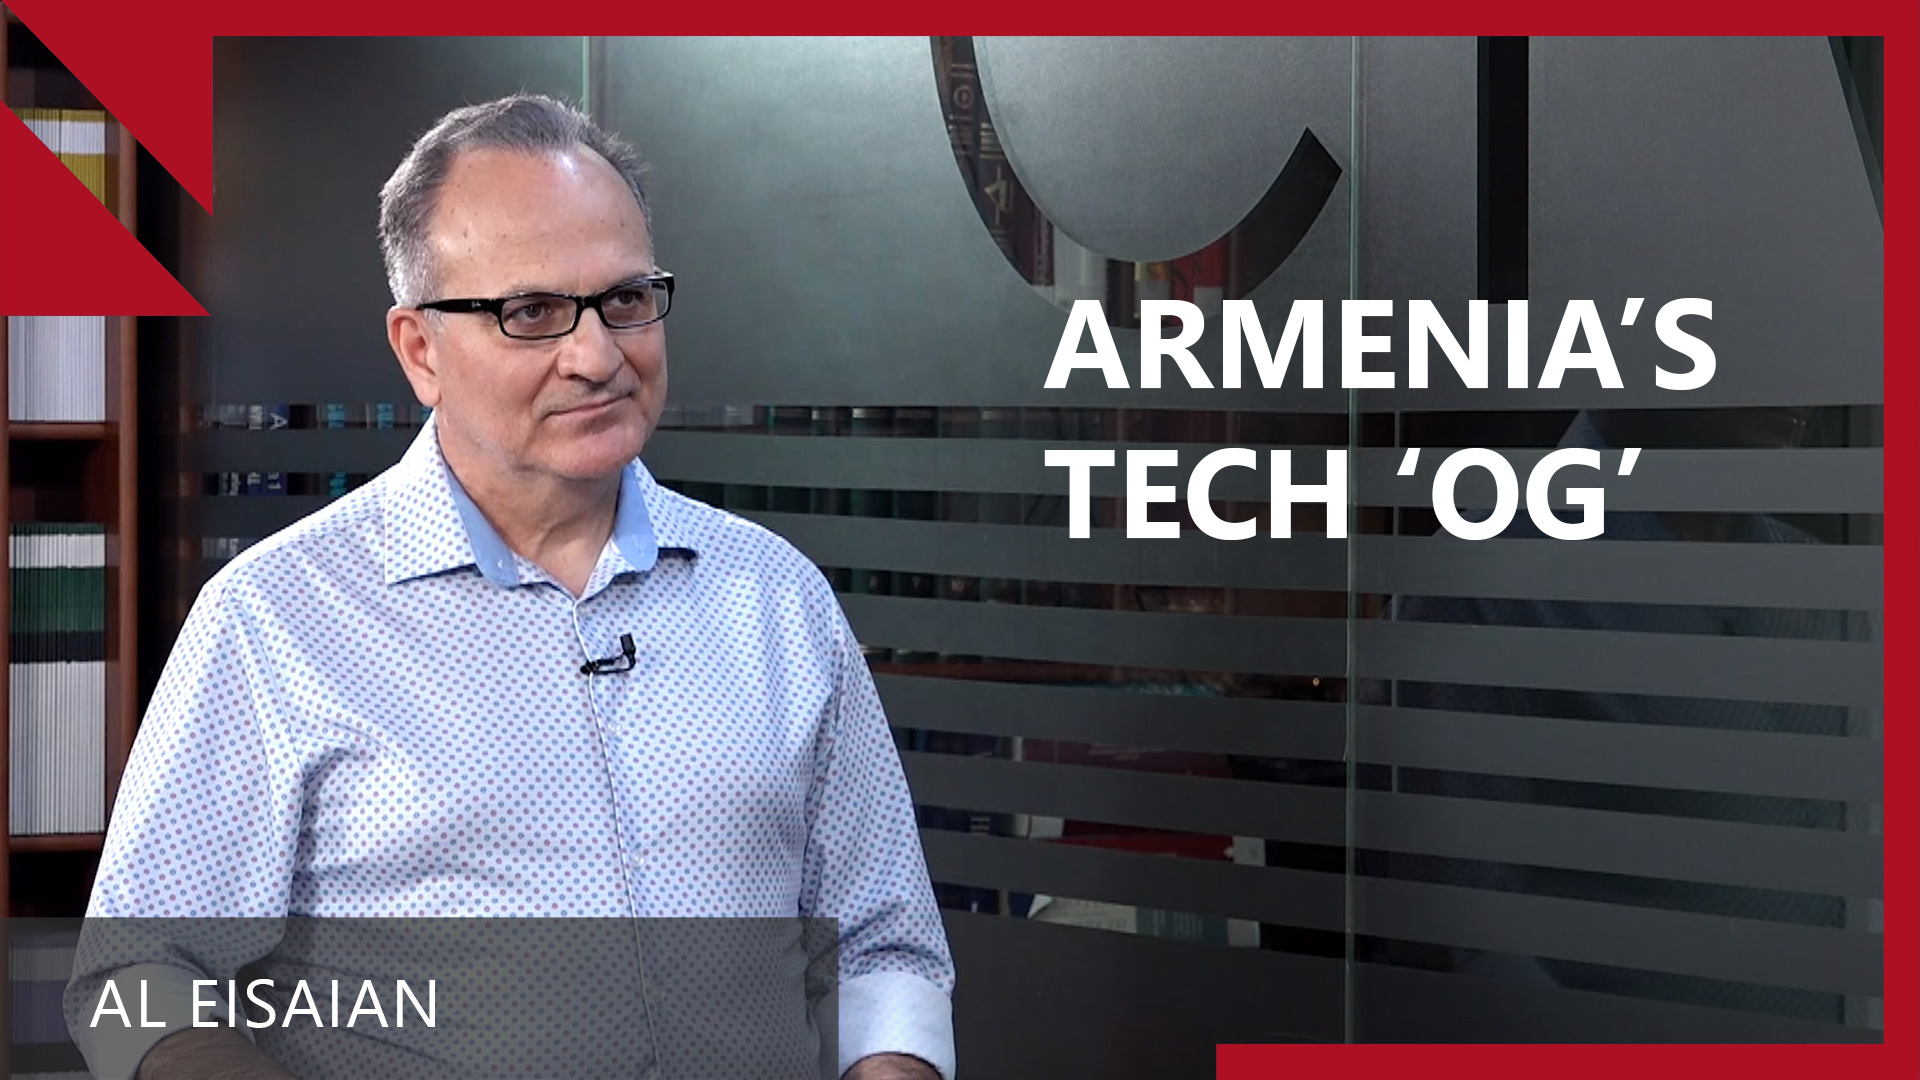 The miracle of Armenia’s tech industry